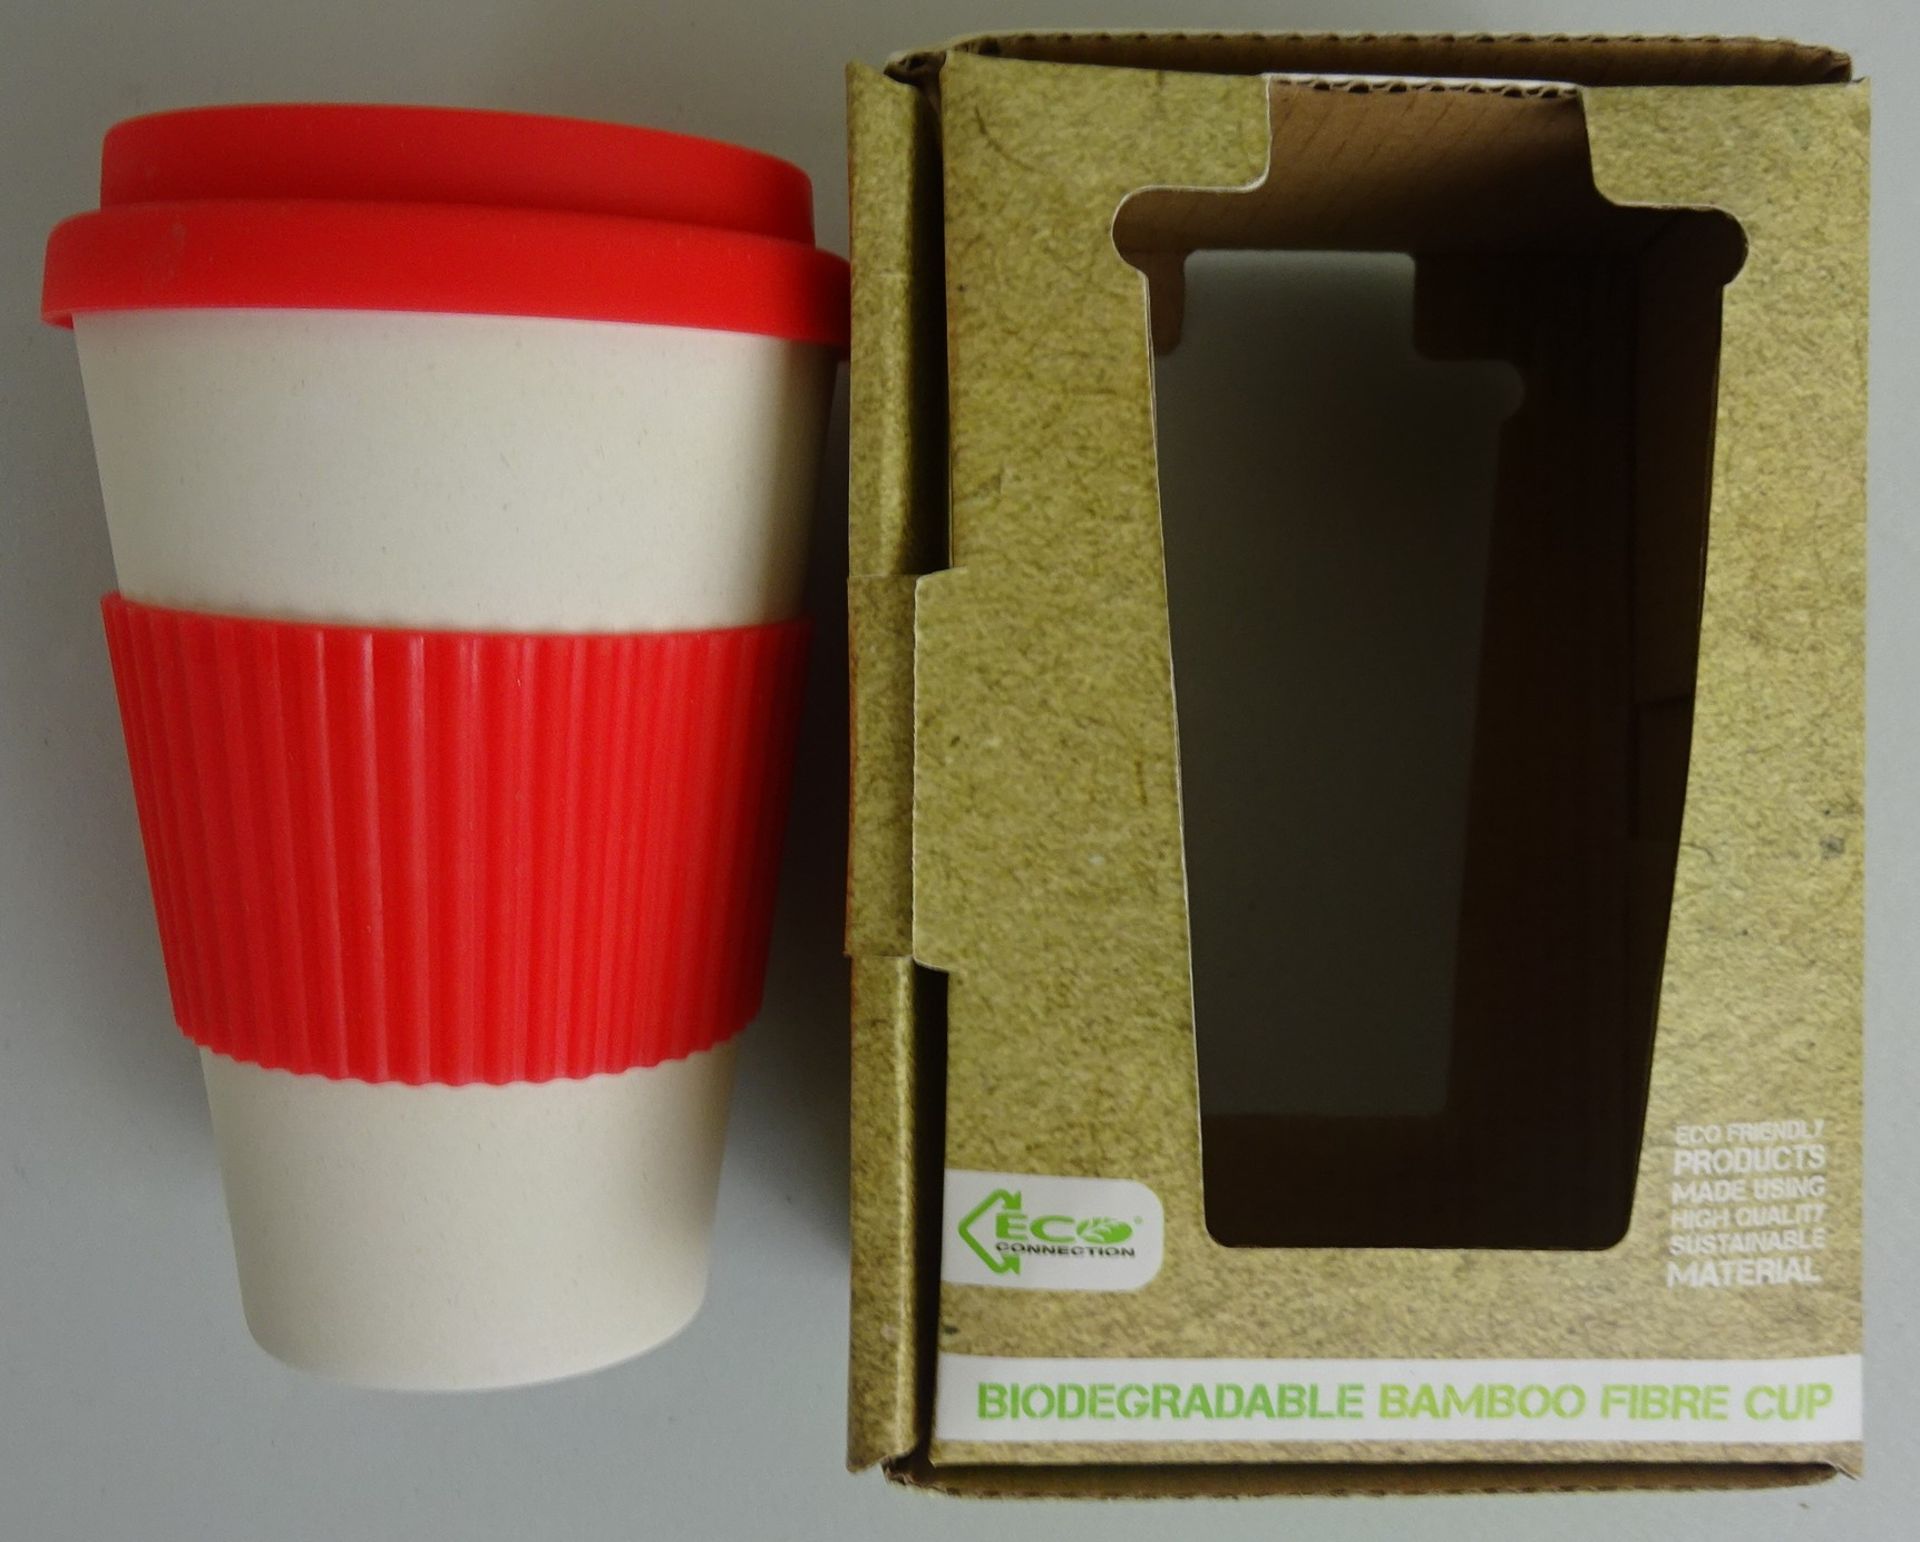 Red Biodegradable Bamboo Fibre Cup